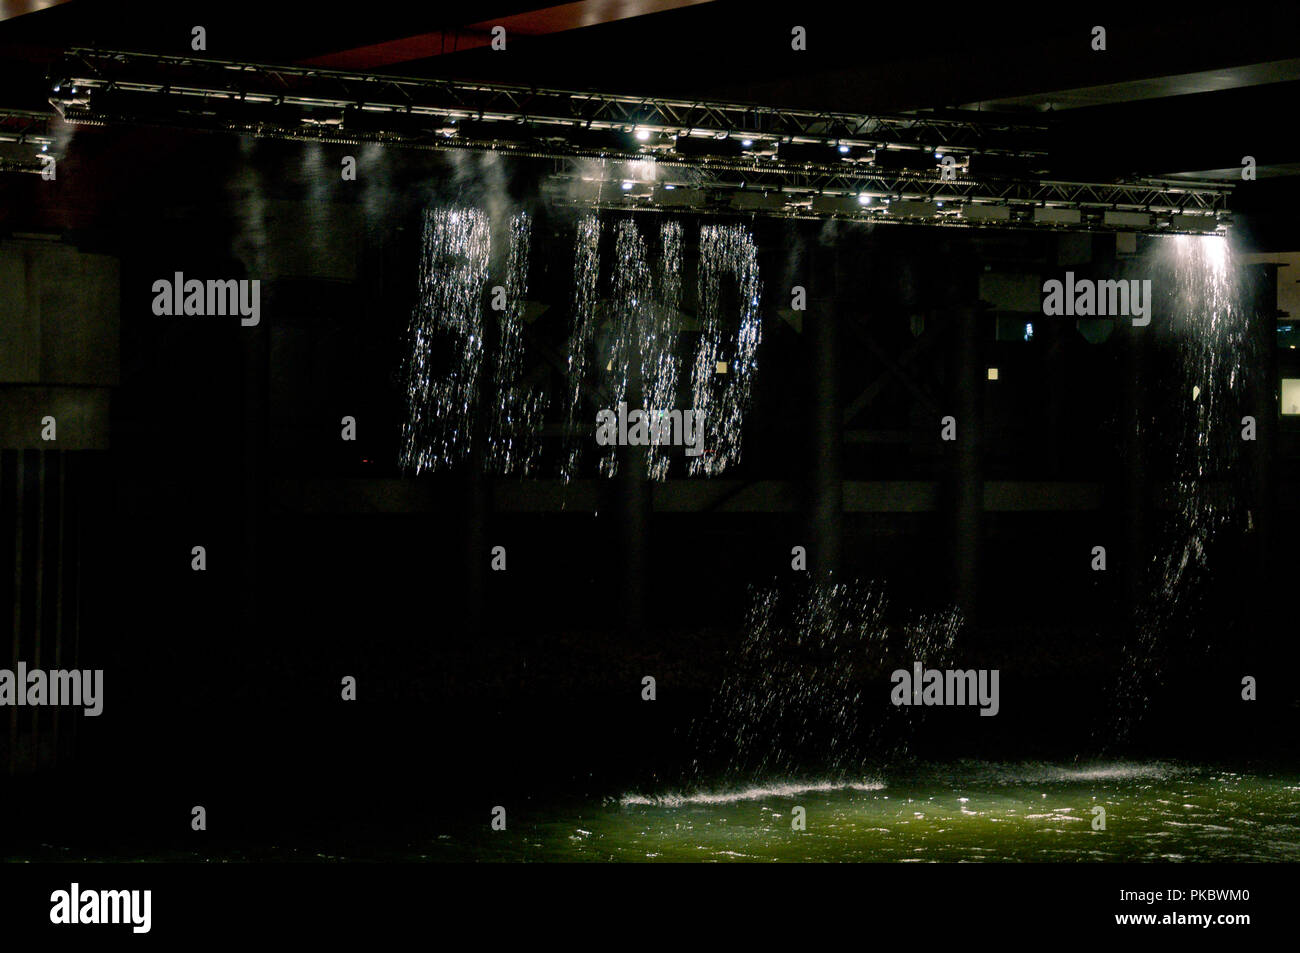 The word 'blind' written in falling water at night at the London Olympic Park 2012, England, UK Stock Photo